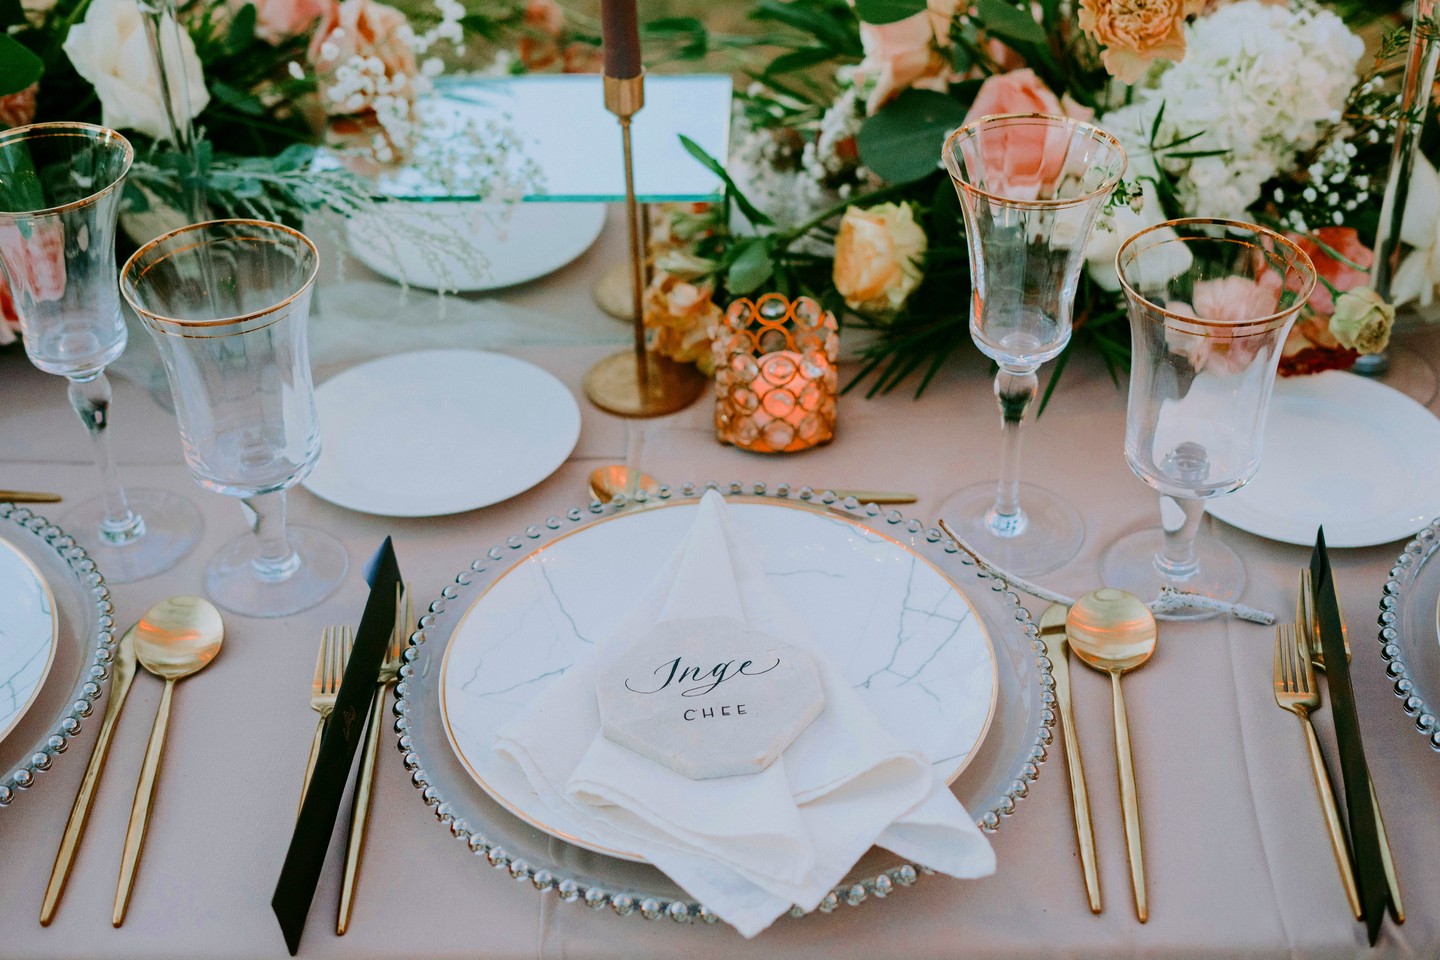 The little details matters when it comes to table setting. "Simplicity is the keynote of all true elegance" - Coco Chanel. 

#dallas #deco #deloyevents #event decor #weddingflorist #weddingflowers #dfw #dallasproposal #dallasengagement #engagement #shesaidyes #shesaidyes#dallasluxuryweddingplanner#dallasweddingrentals #dallasevents #dallasweddingvendors #dallasweddingvenues #dallasluxuryweddings #dallasbride #dallaslavishweddingdecor #dallaspartyrentals #dallascelebrityweddings #blackbrides #dallasflorist #dallasweddingvendors #dallaspartyrentals #dallaslavishweddingdecor